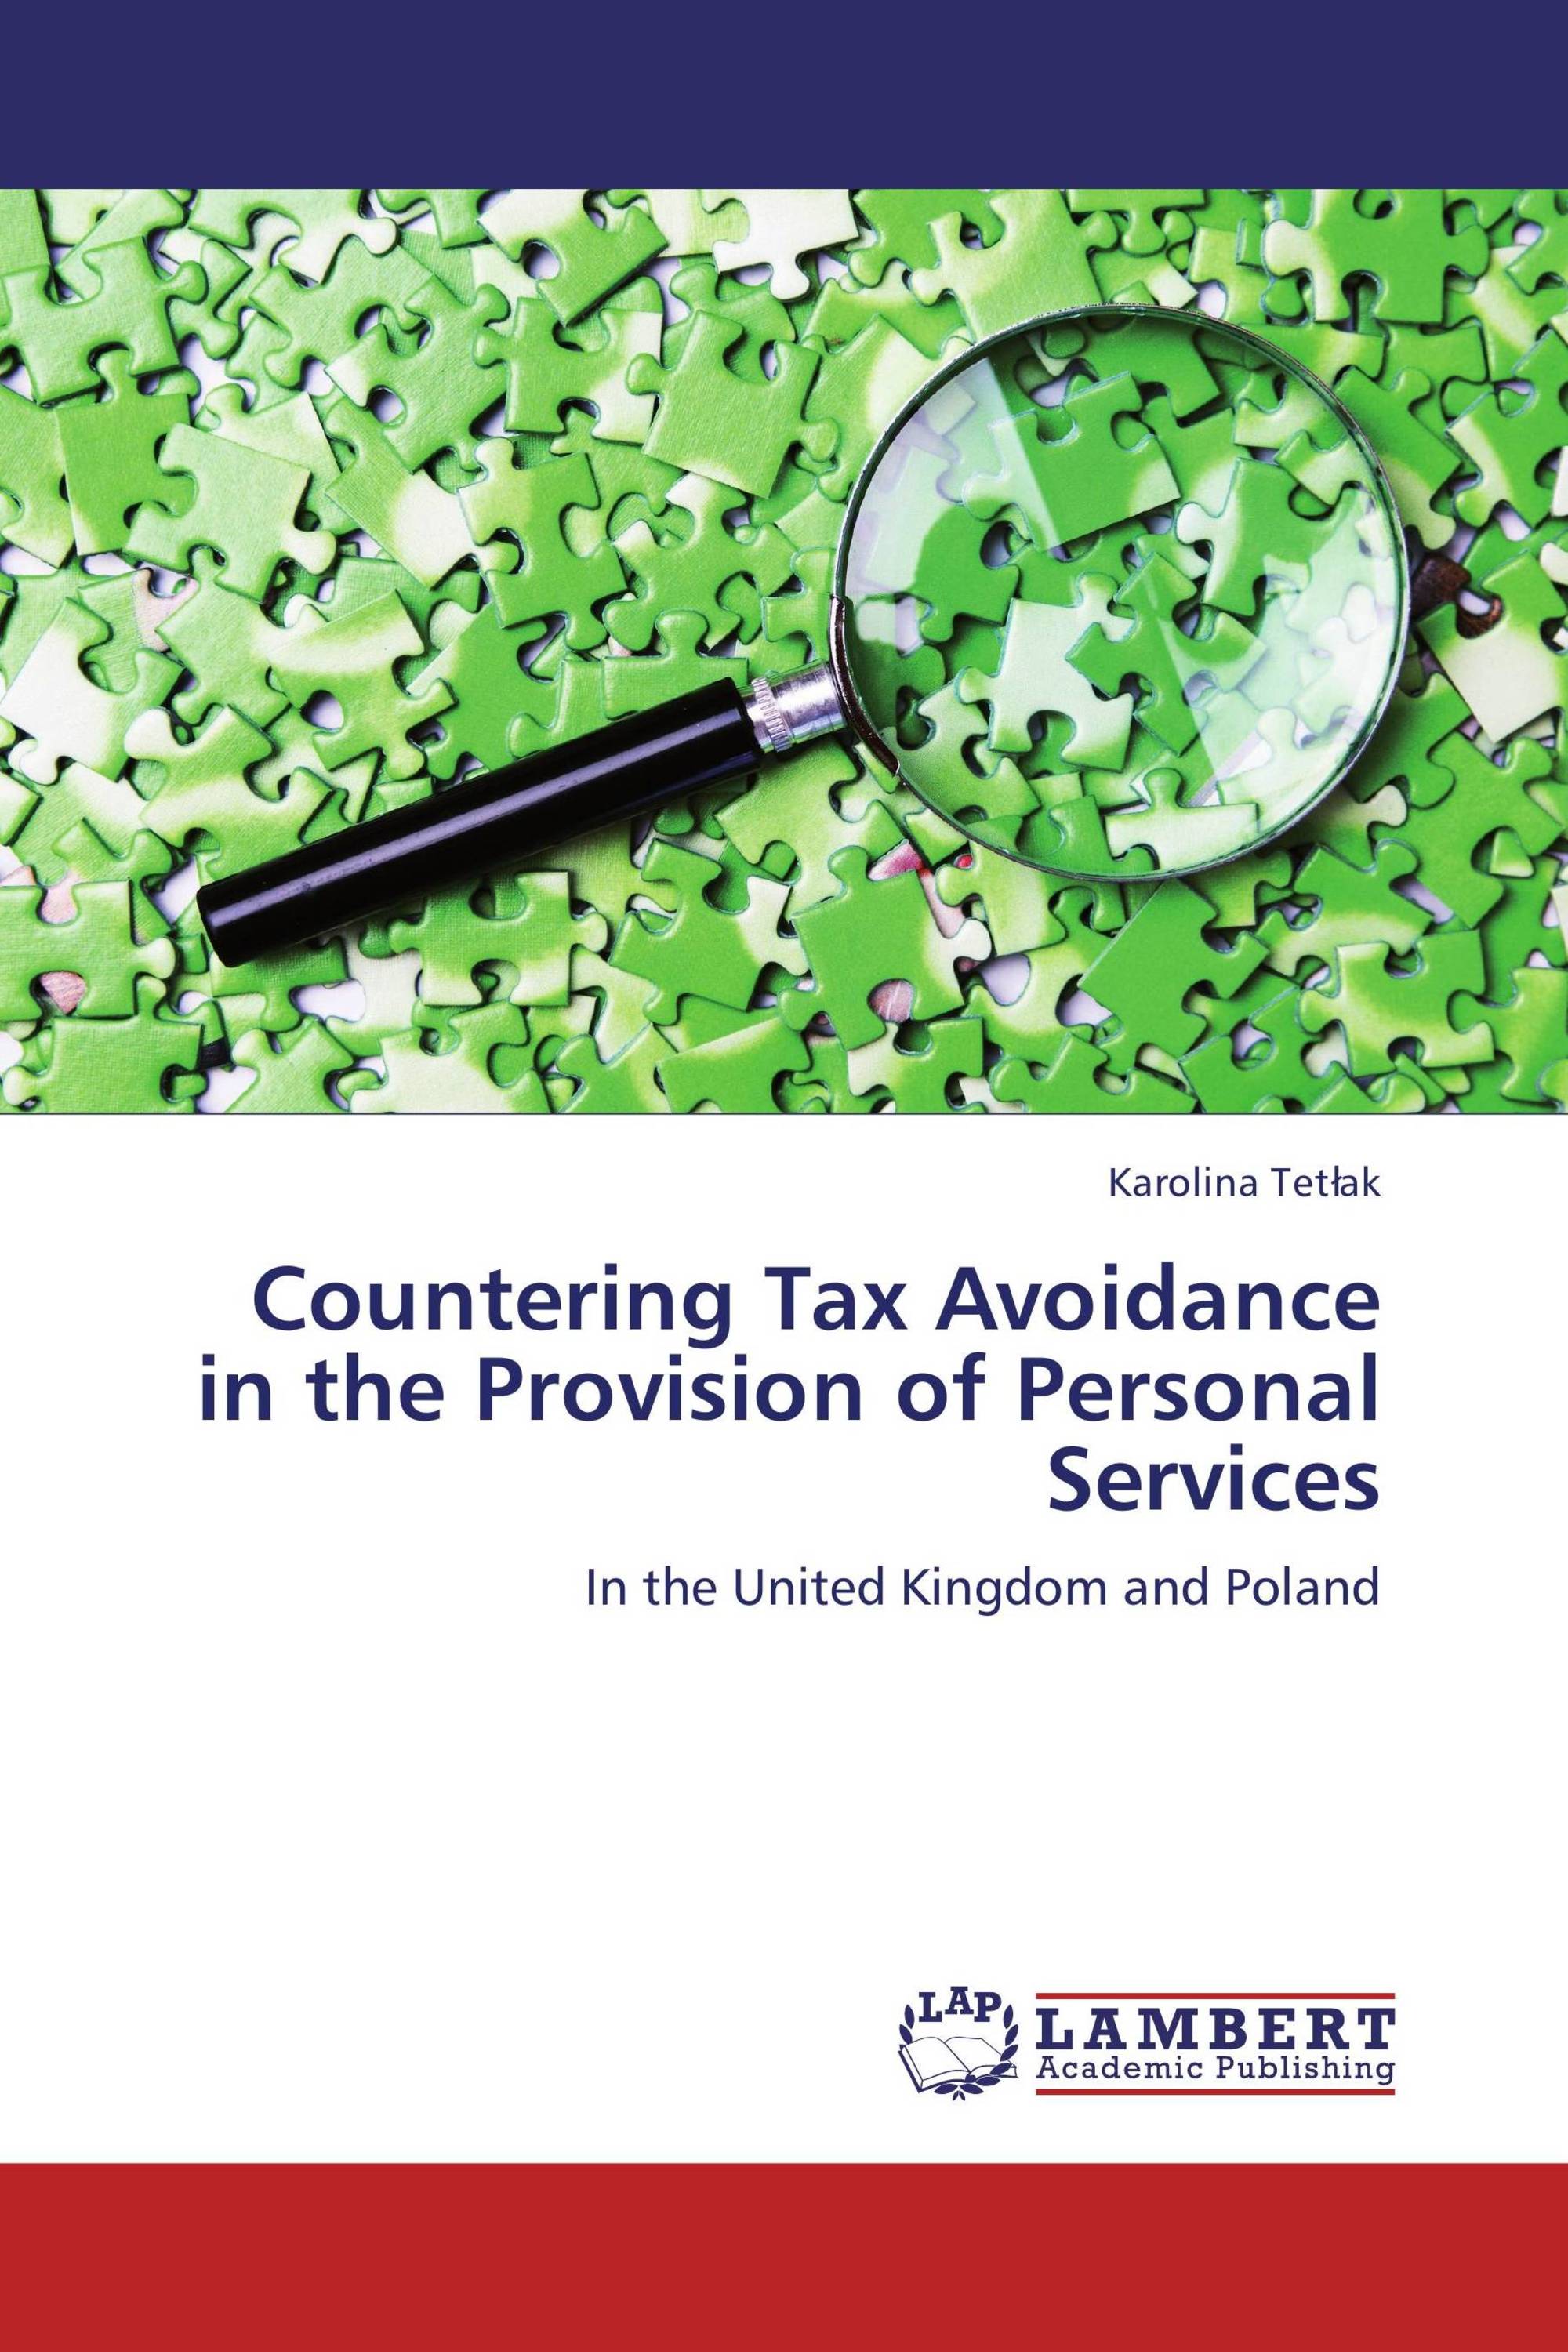 Countering Tax Avoidance in the Provision of Personal Services